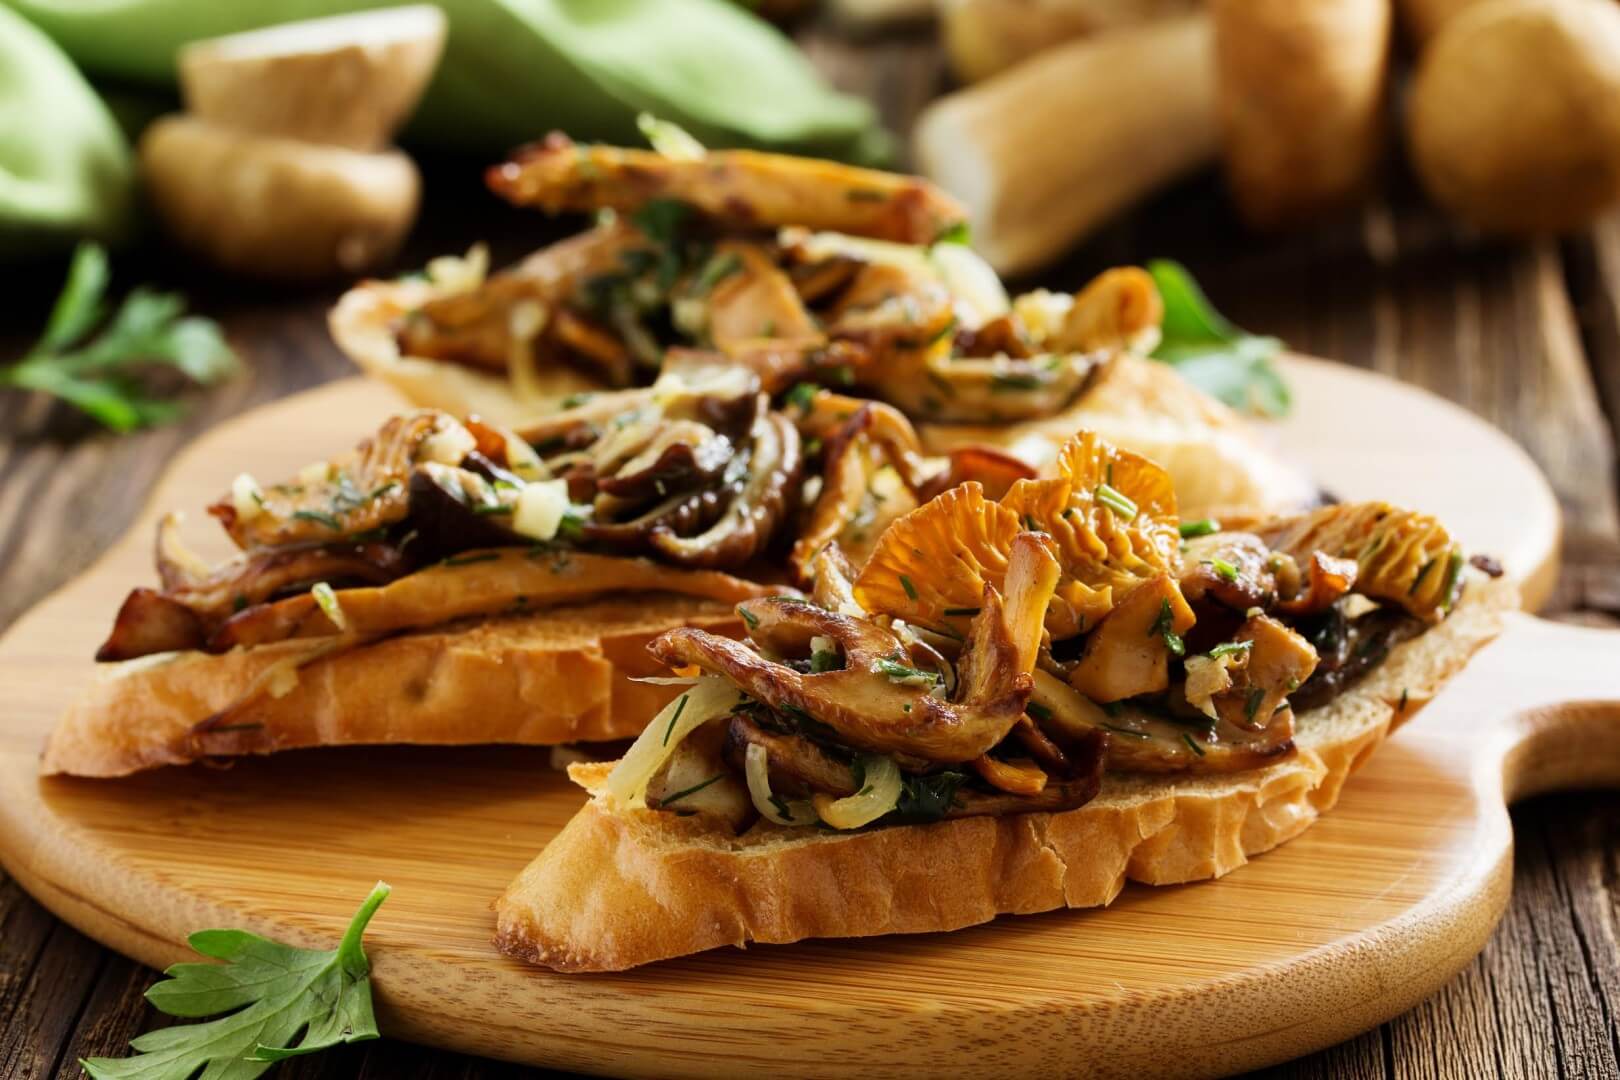 Spicy Lamb and Mushroom Crostini with Ginger Creme